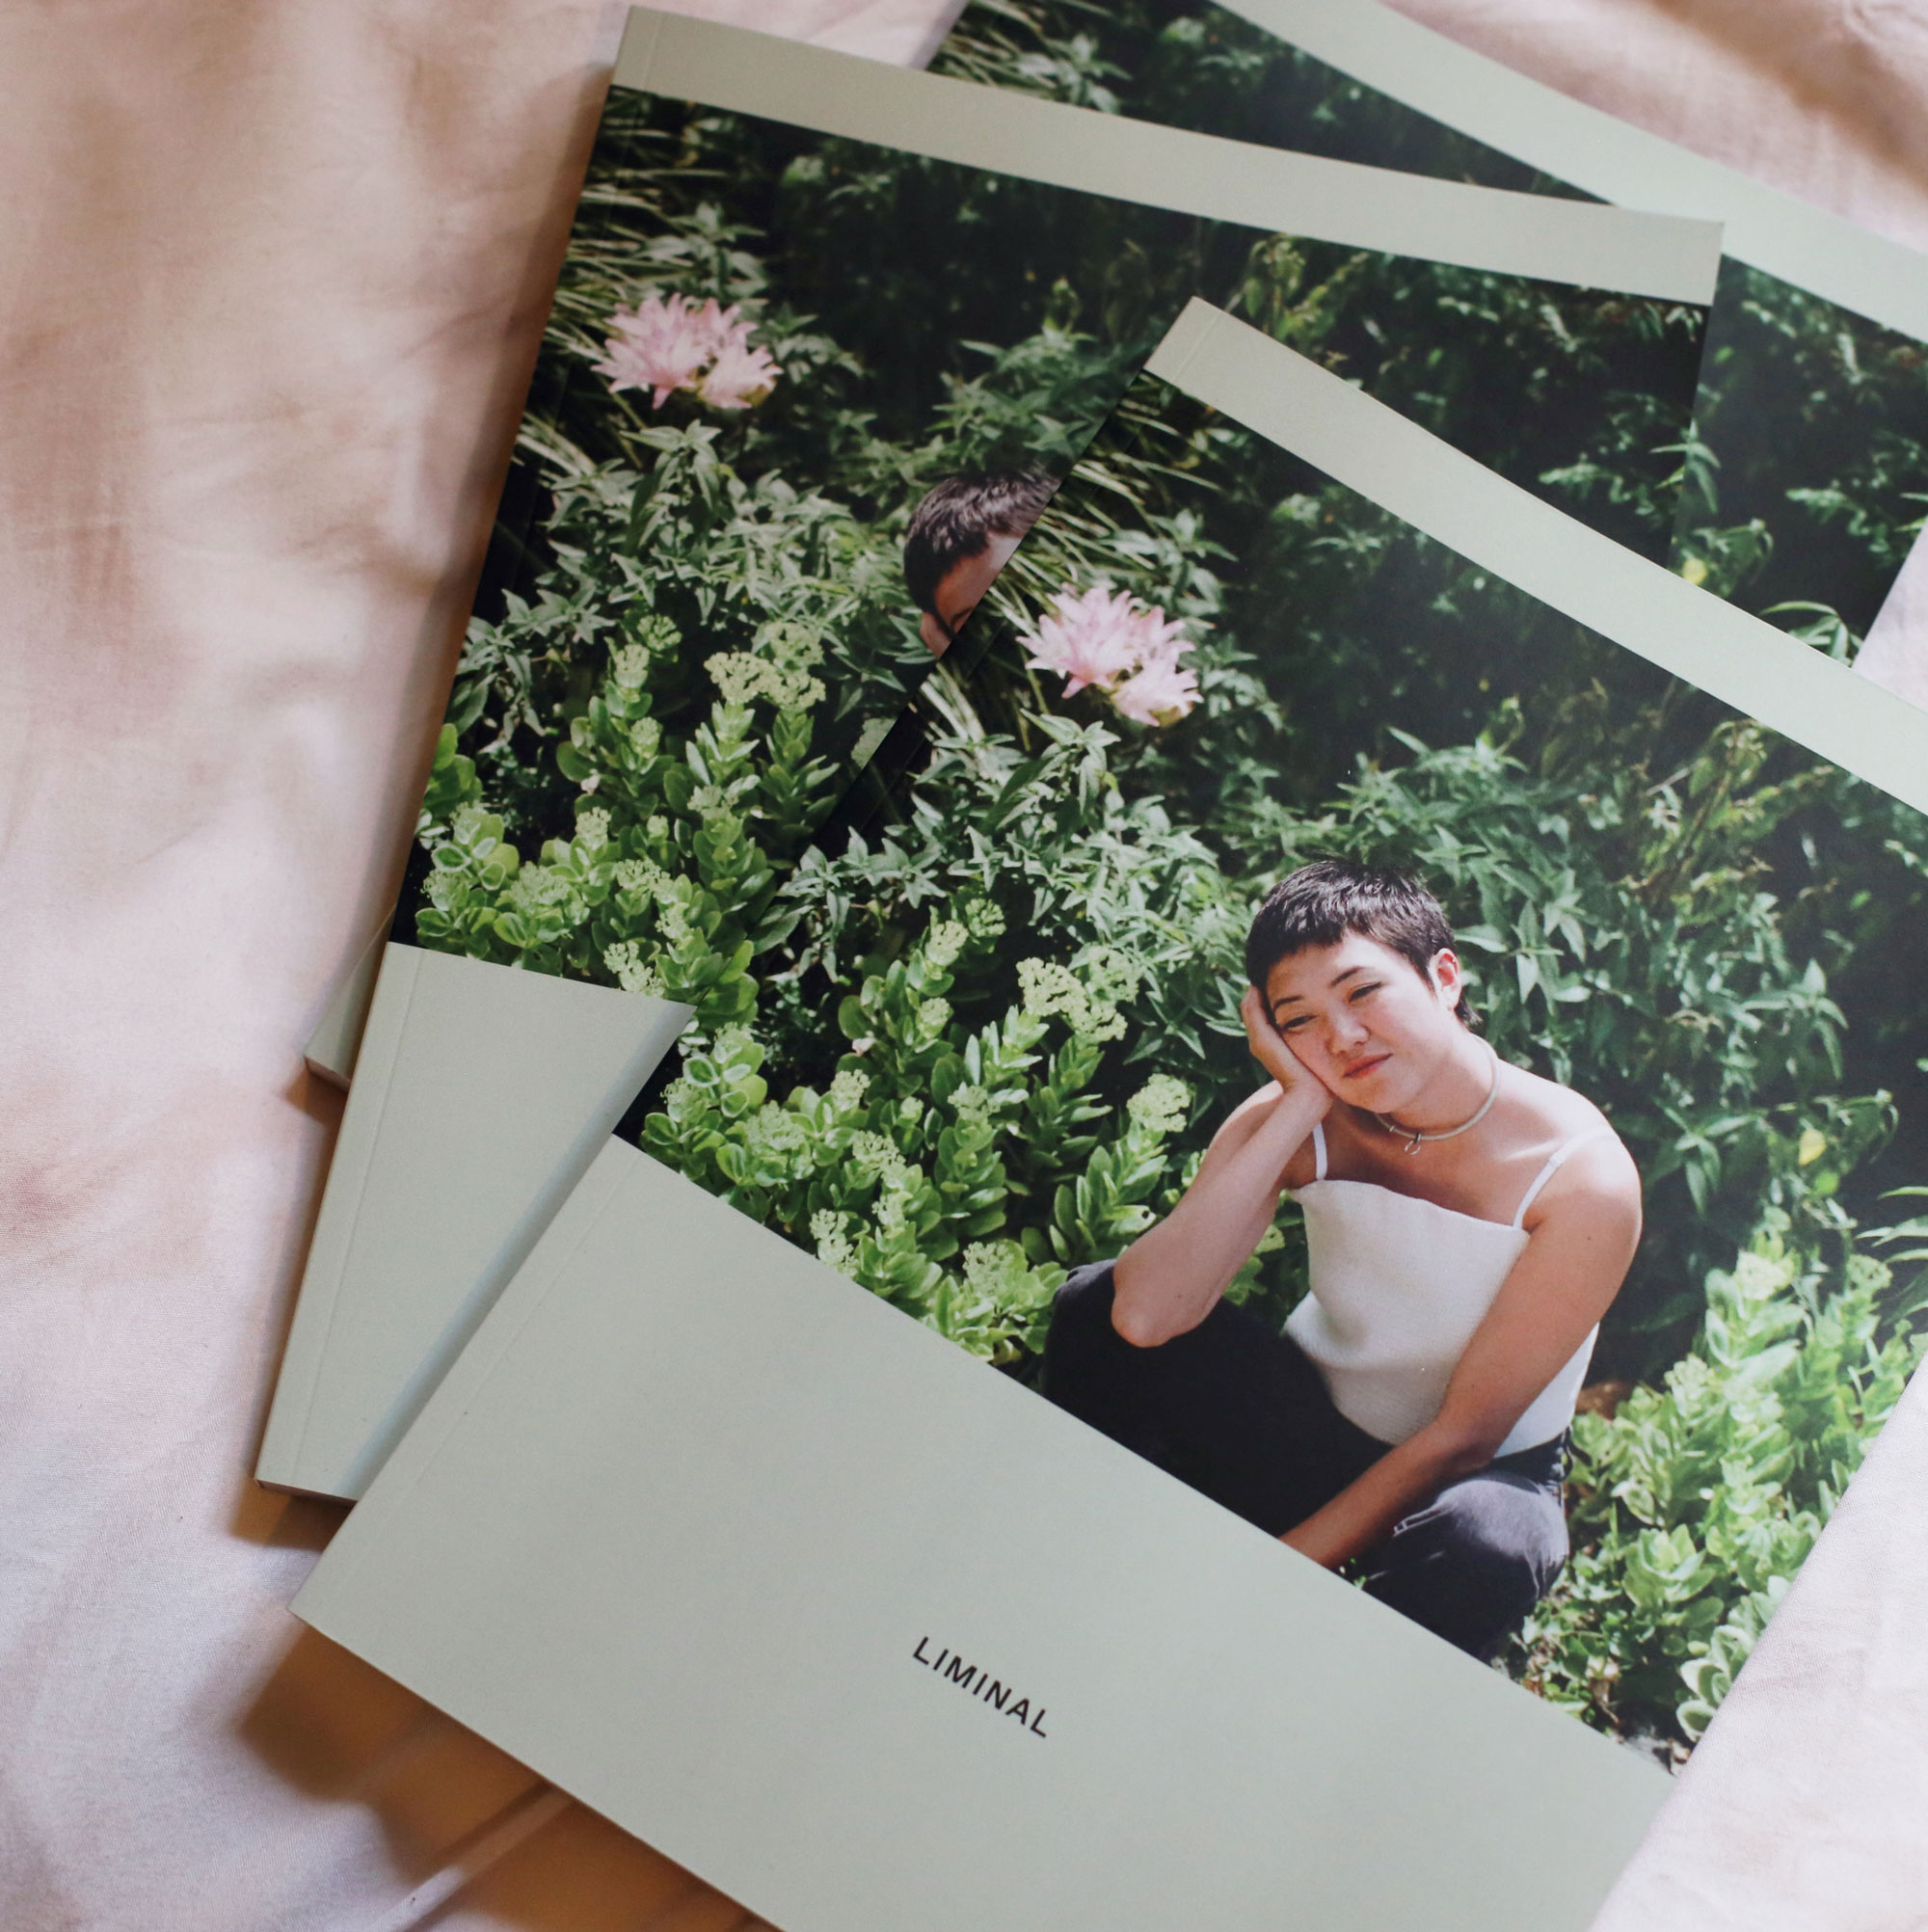 three copies of liminal magazine with asian woman posing in garden on cover